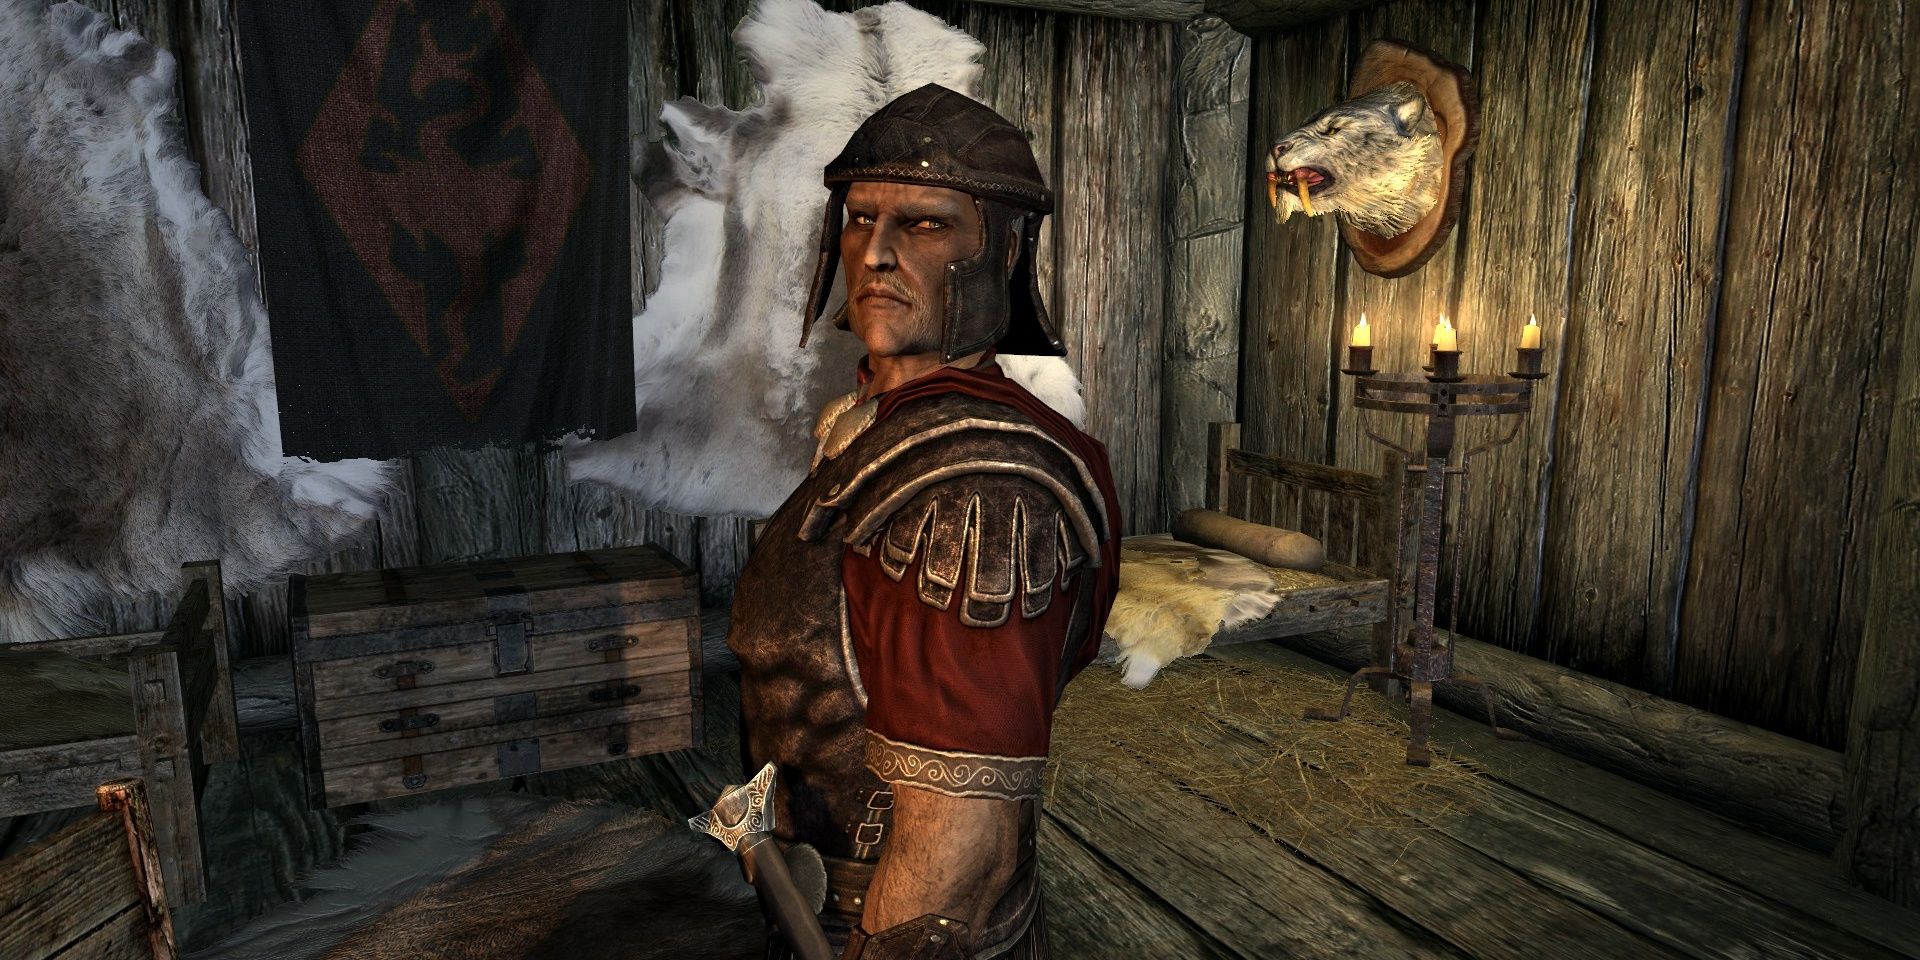 A man dressed in red and metal armor stares at the viewer inside his bunk with a banner and animal head on the walls.